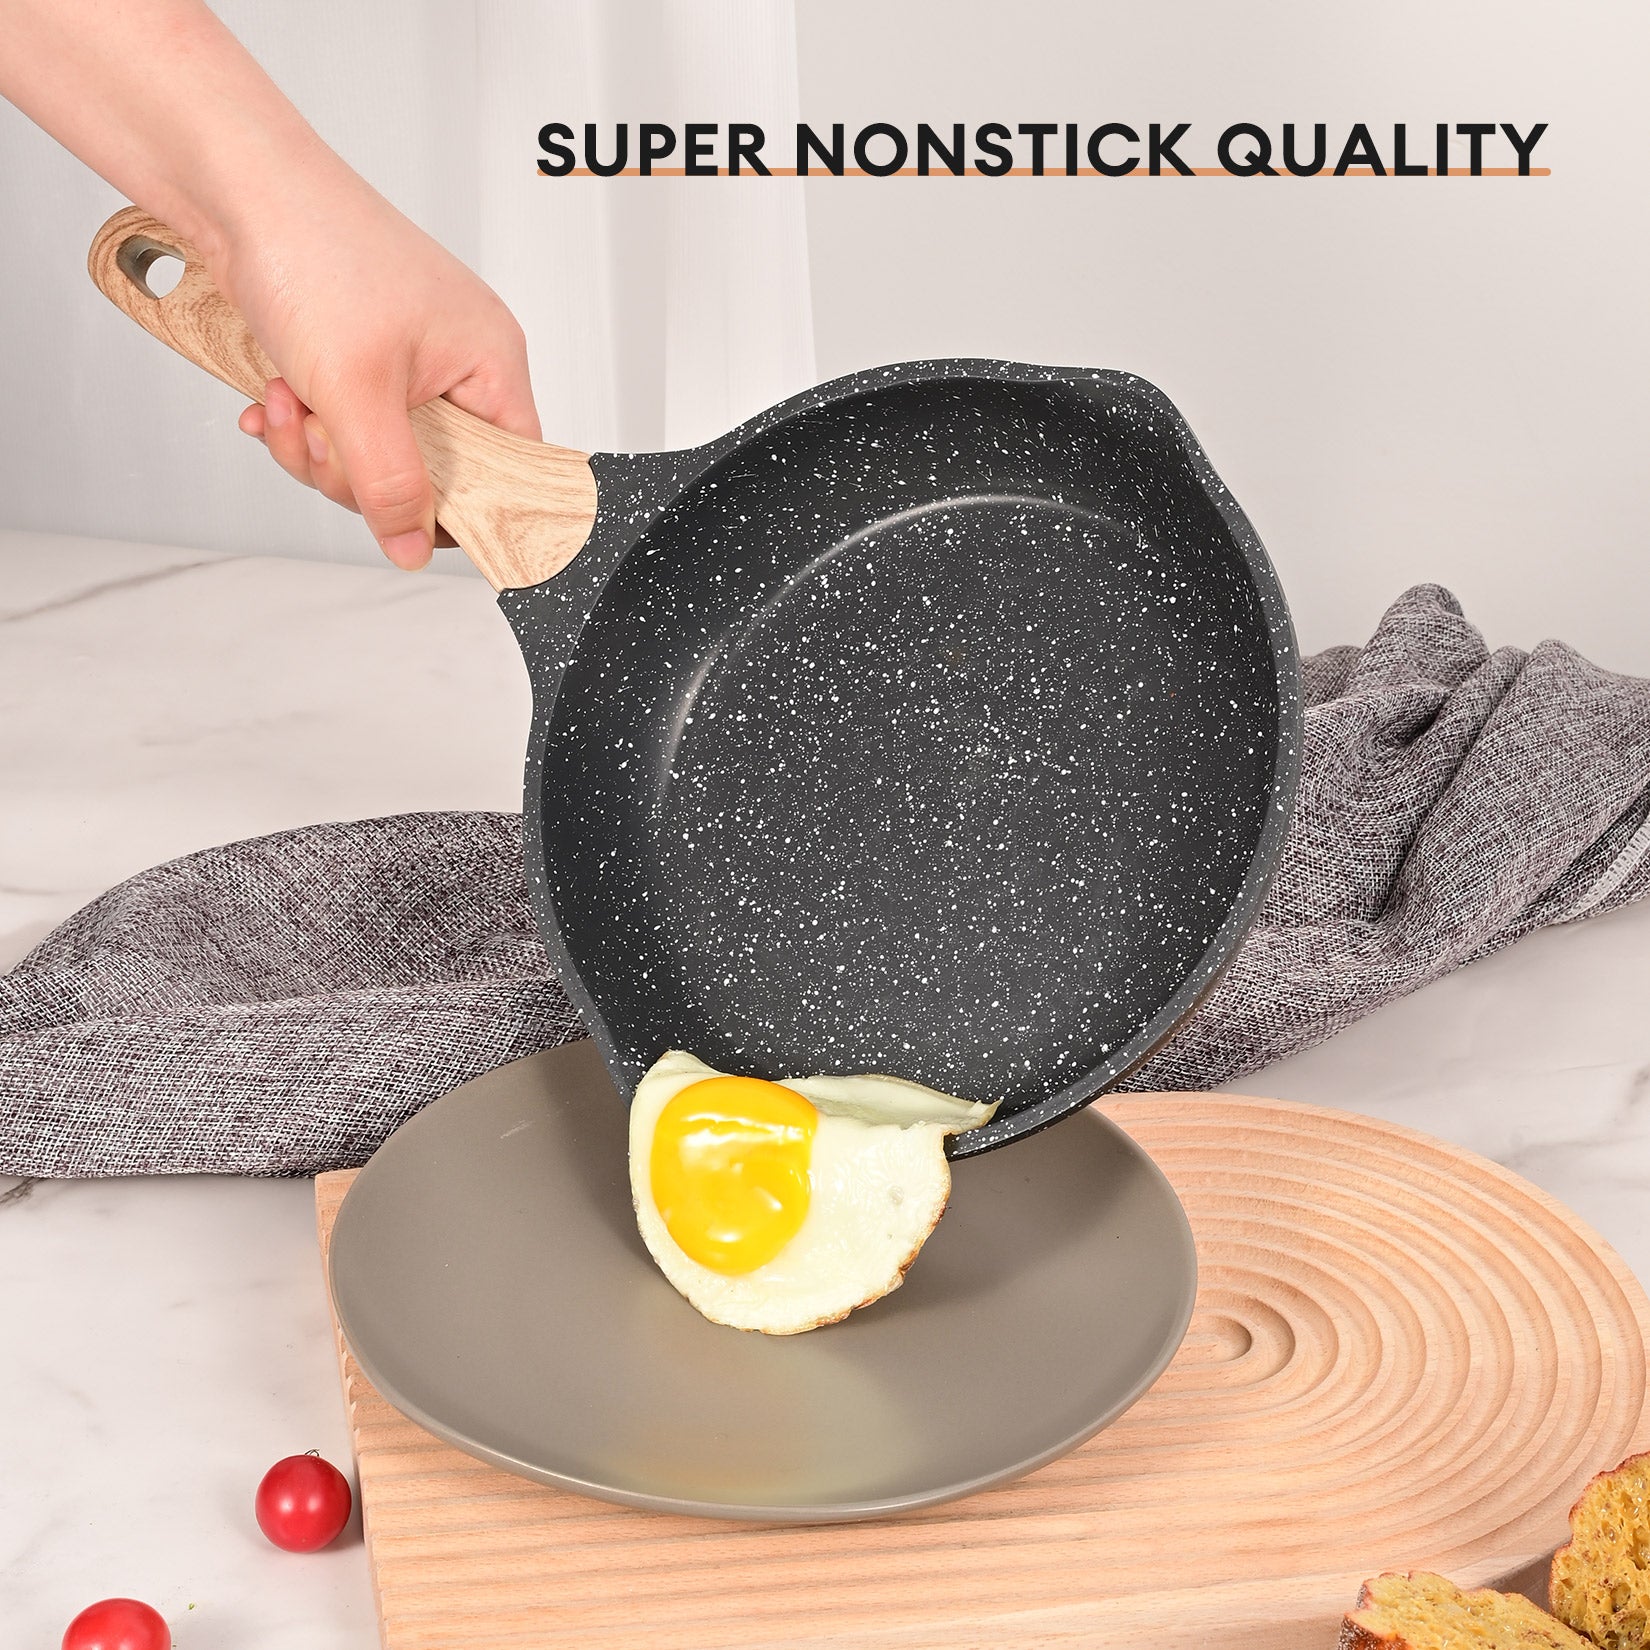  JEETEE Kitchen Pots and Pans Set Nonstick Granite Coating  Cookware Sets Pot Set 8 Inch Frying Pan & 2 Quart Saucepan with Lid, Oven  Safe: Home & Kitchen